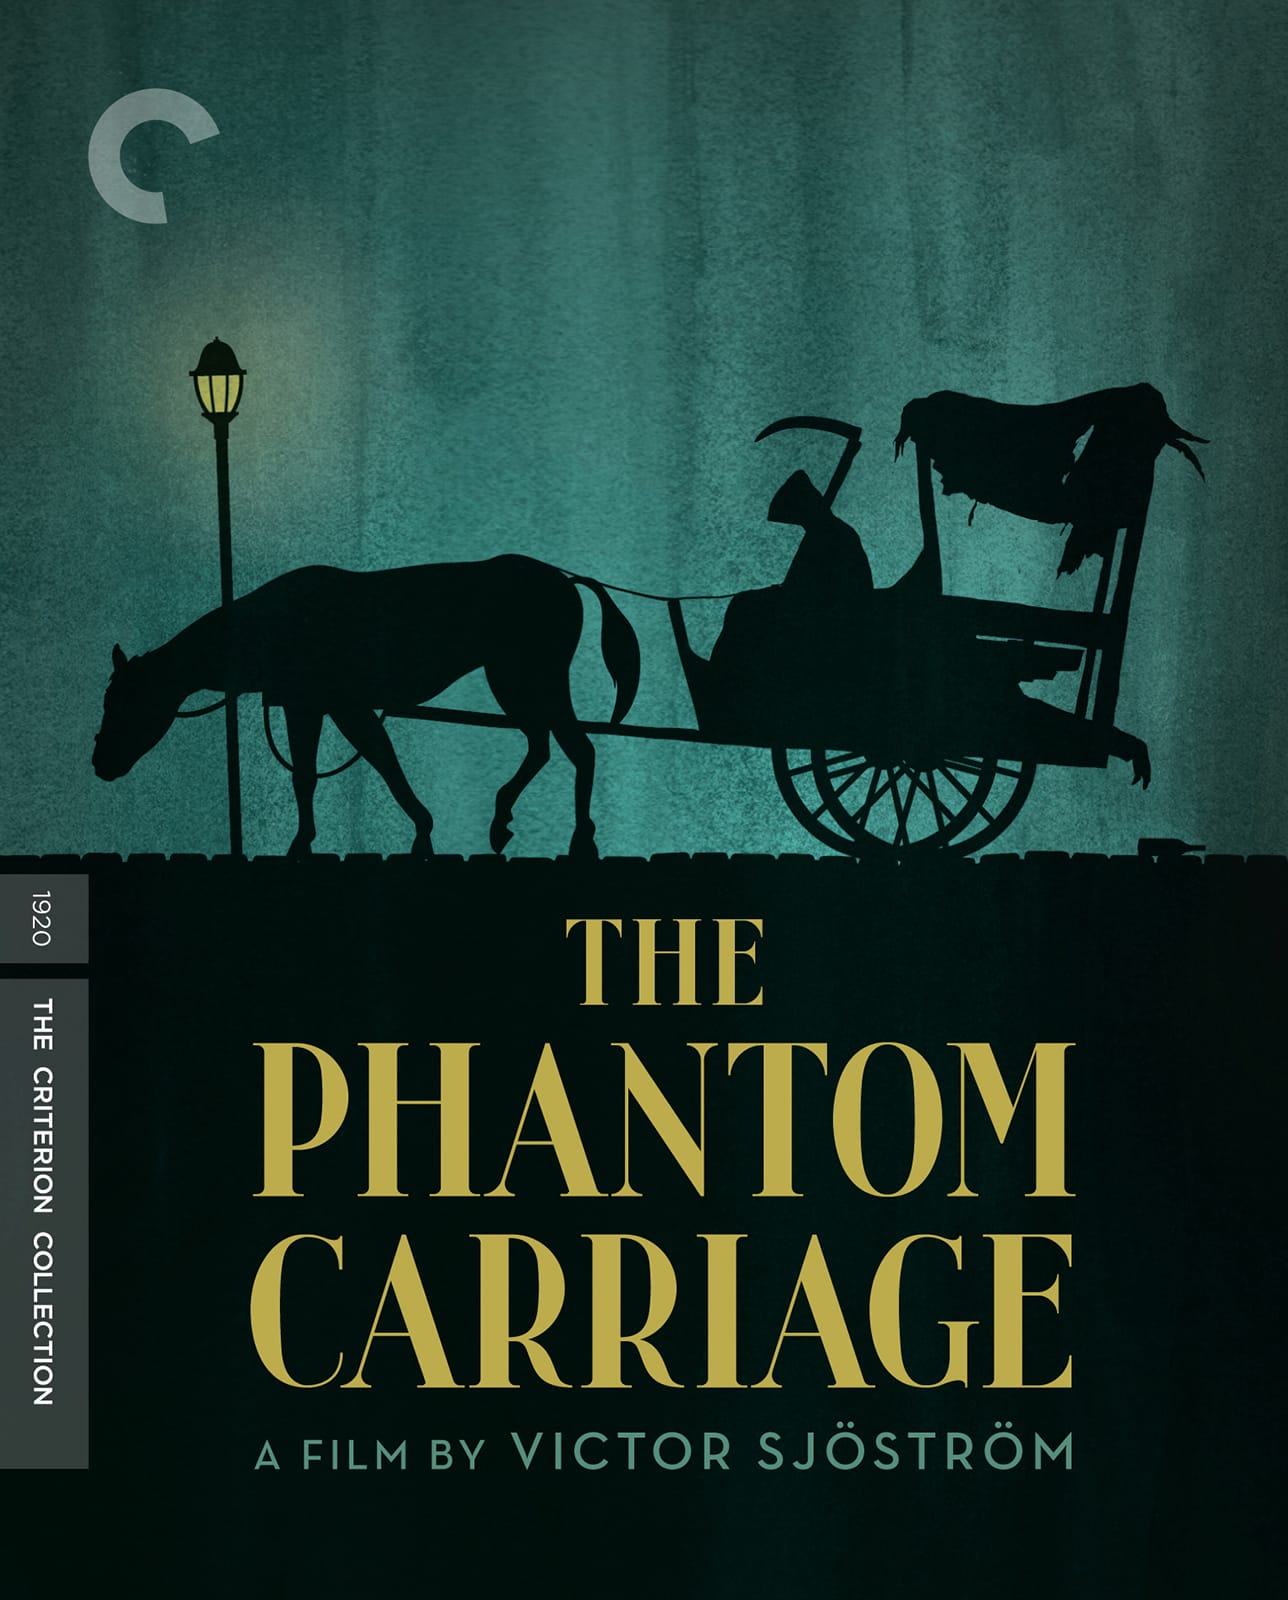 This month: The Phantom Carriage (1921)  Legend has it that on New Year's Eve, just before the clock strikes midnight, the last person to pass away will be cursed to take the reins of death's carriage and gather new souls for the coming year. Oh, don't believe in ghost stories? Well, neither did a drunken man late one New Year's Eve, until a ghostly apparition showed him the consequence of a misspent life...  Come join us for this teeth-chattering, Dickensian classic, said to have inspired Ingmar Bergman.